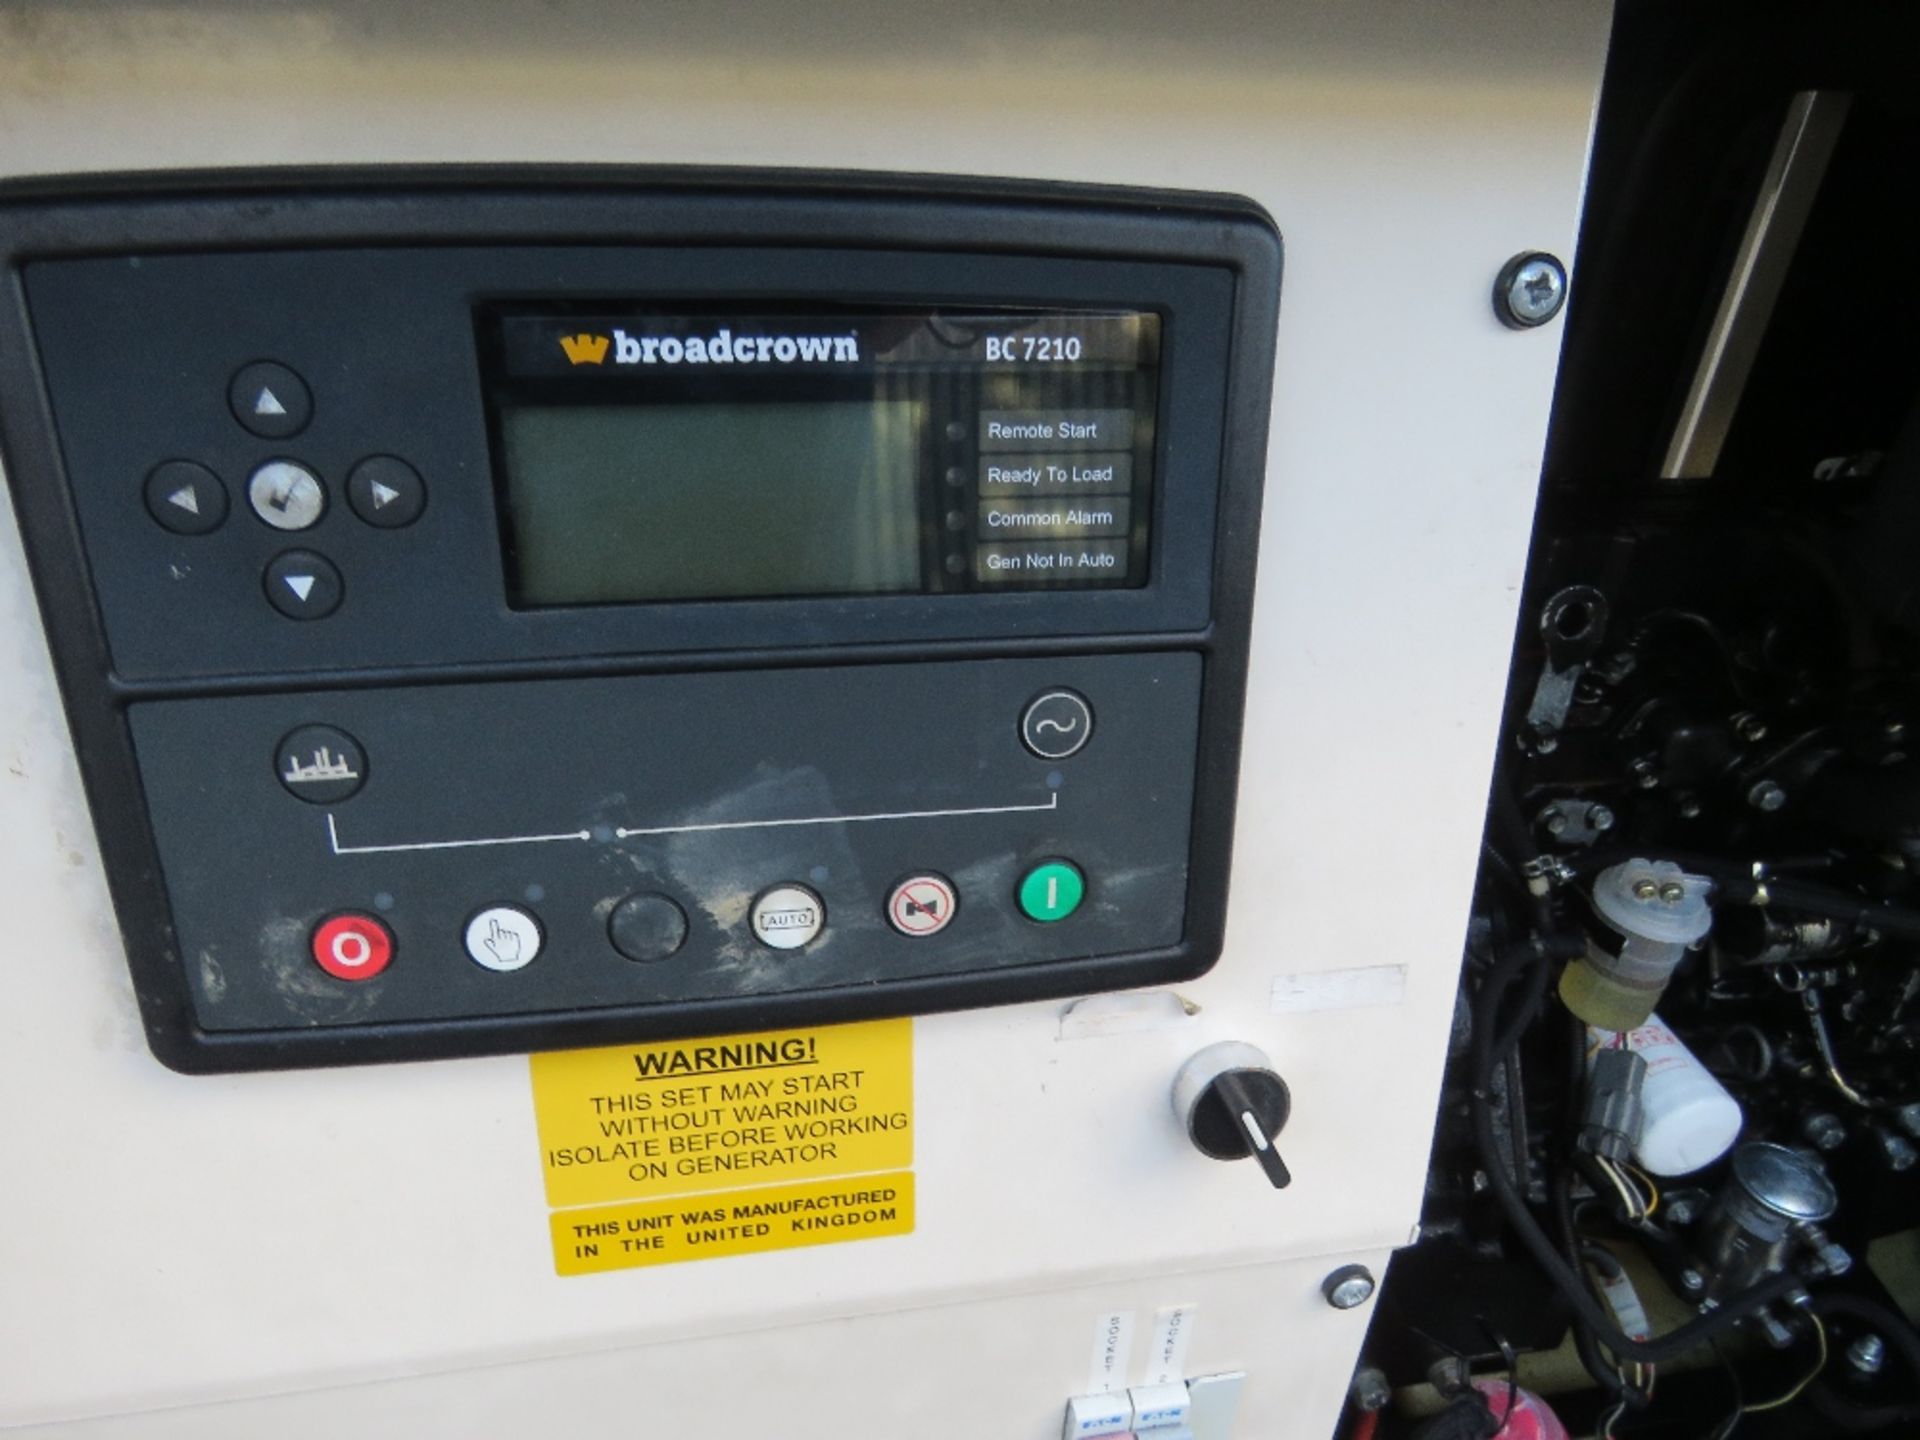 JCB 11KVA SKID MOUNTED SILENCED GENERATOR, SINGLE PHASE 240V OUTPUT, 2016 BUILD. SOURCED FROM MAJOR - Image 2 of 7